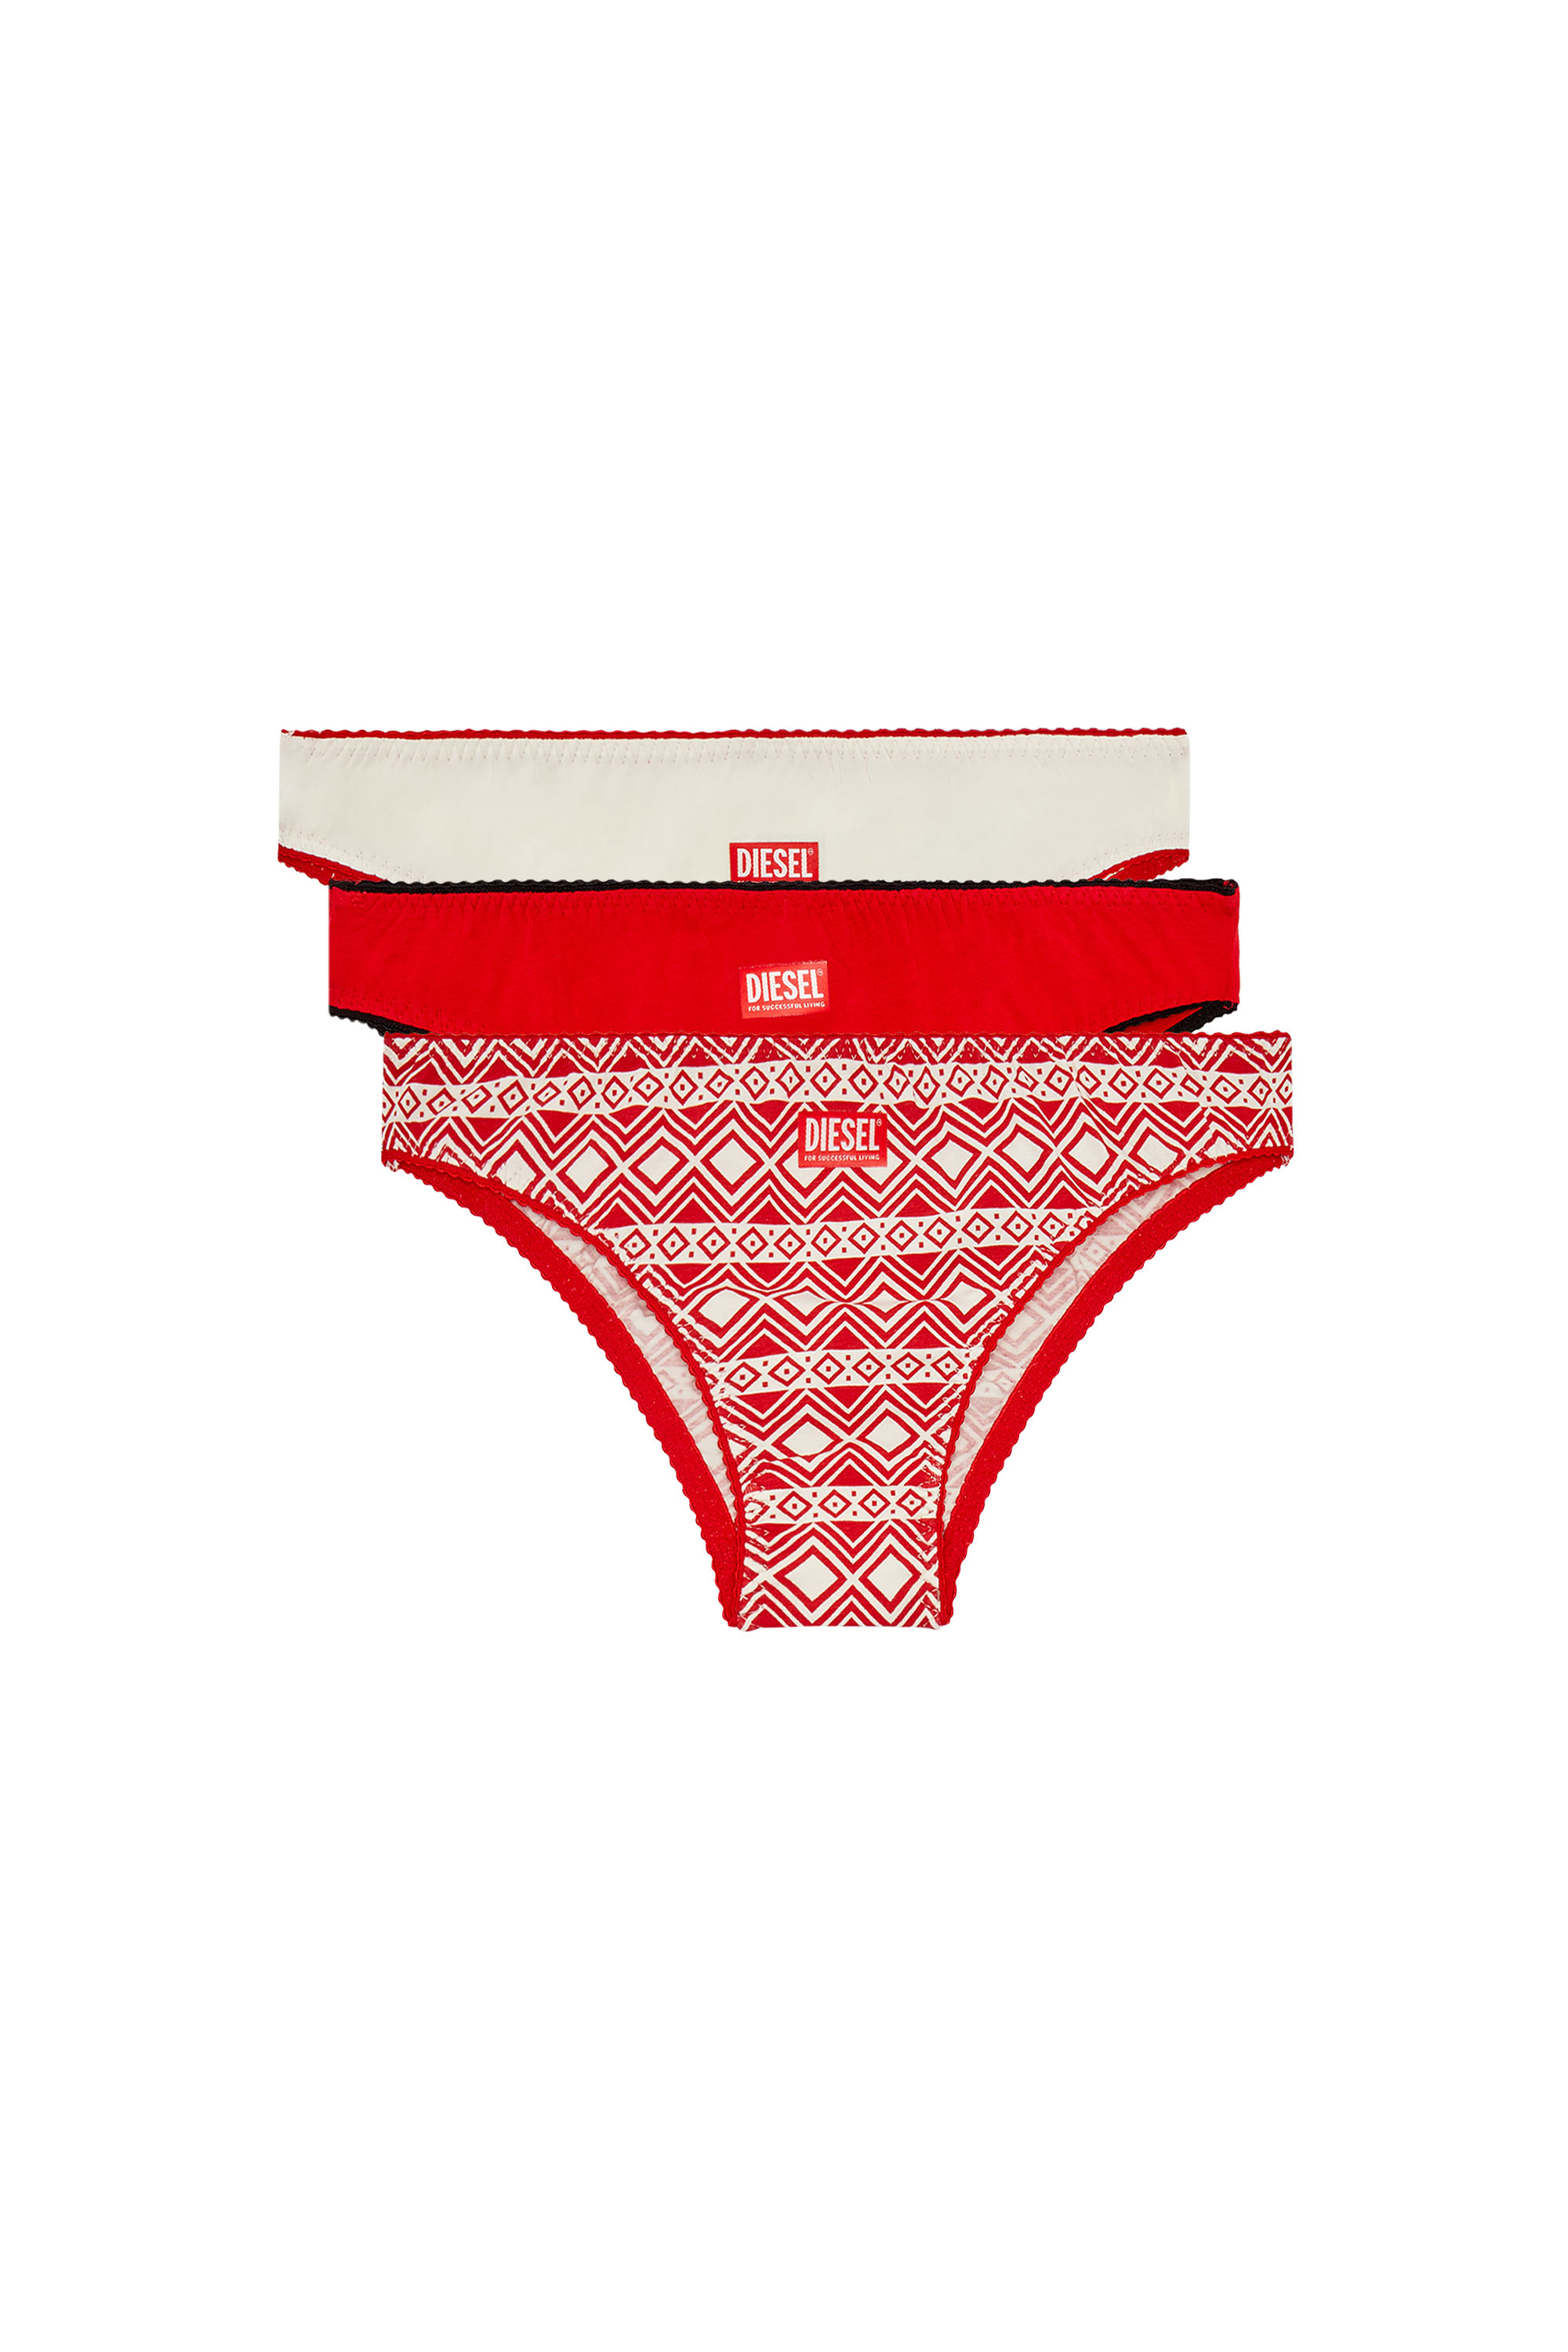 Three-pack of briefs plain and patterned